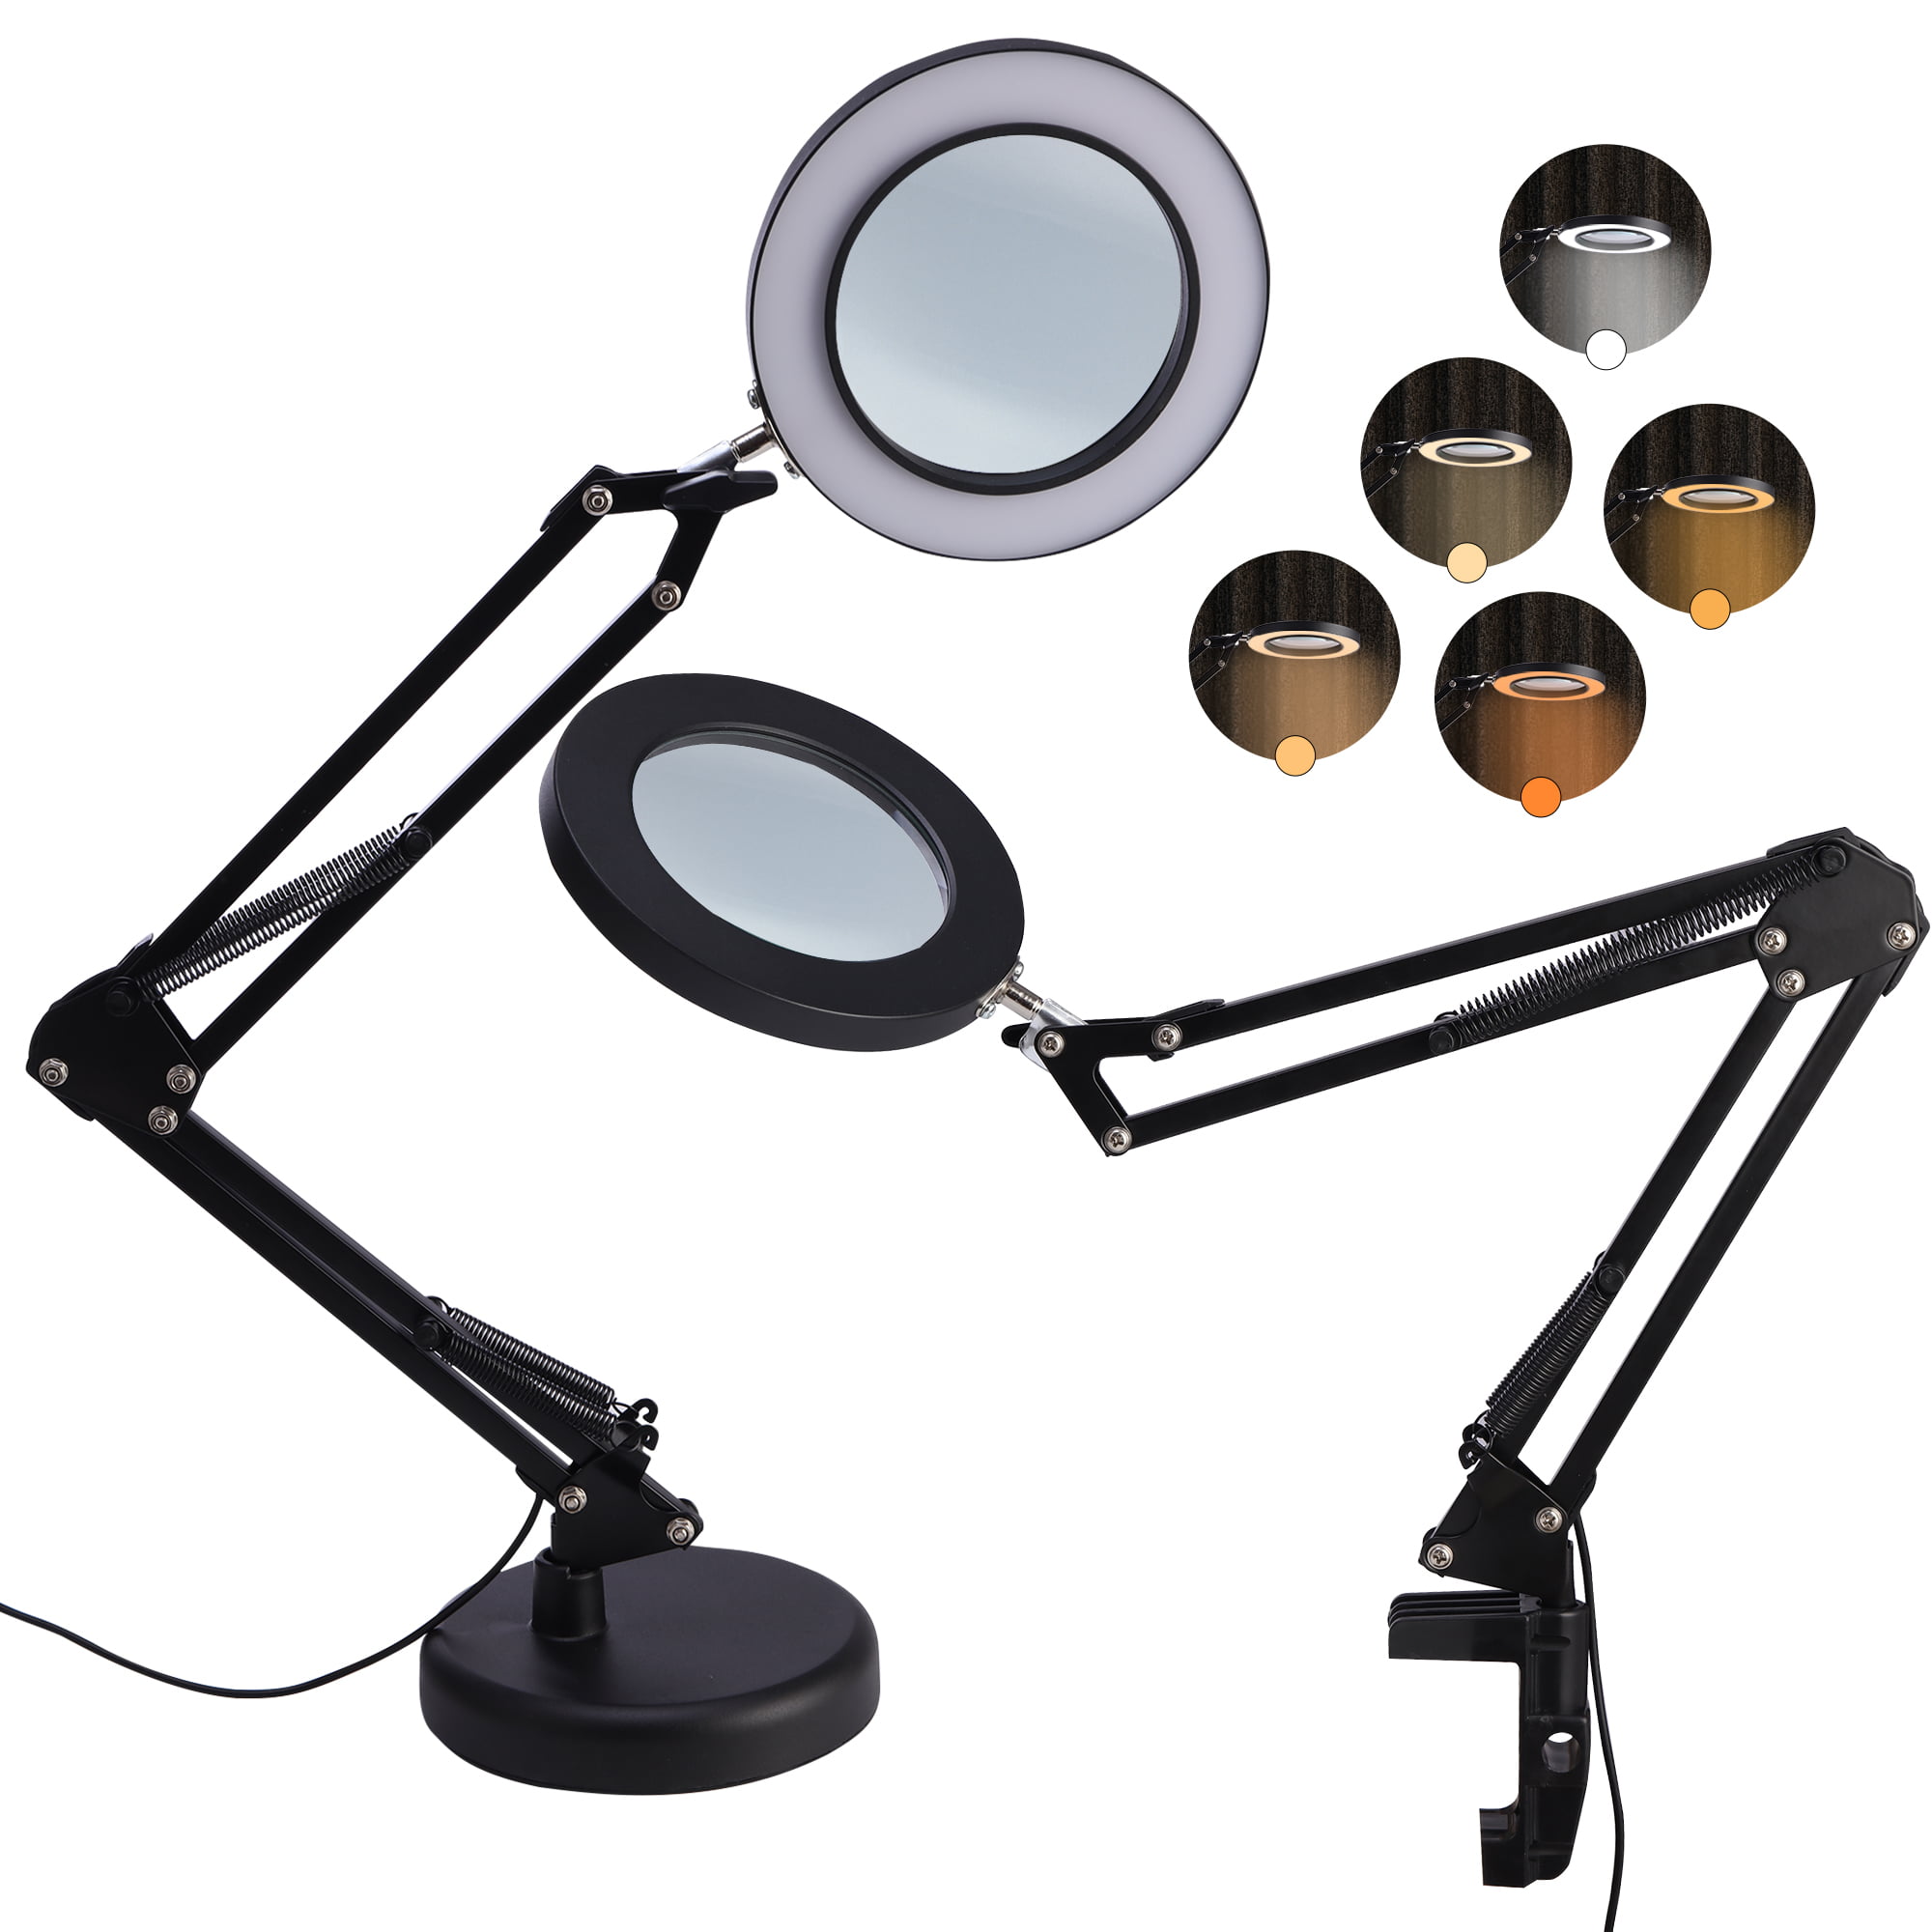 5X Magnifying Glass with Light and Stand, Veemagni 2,200 Lumens